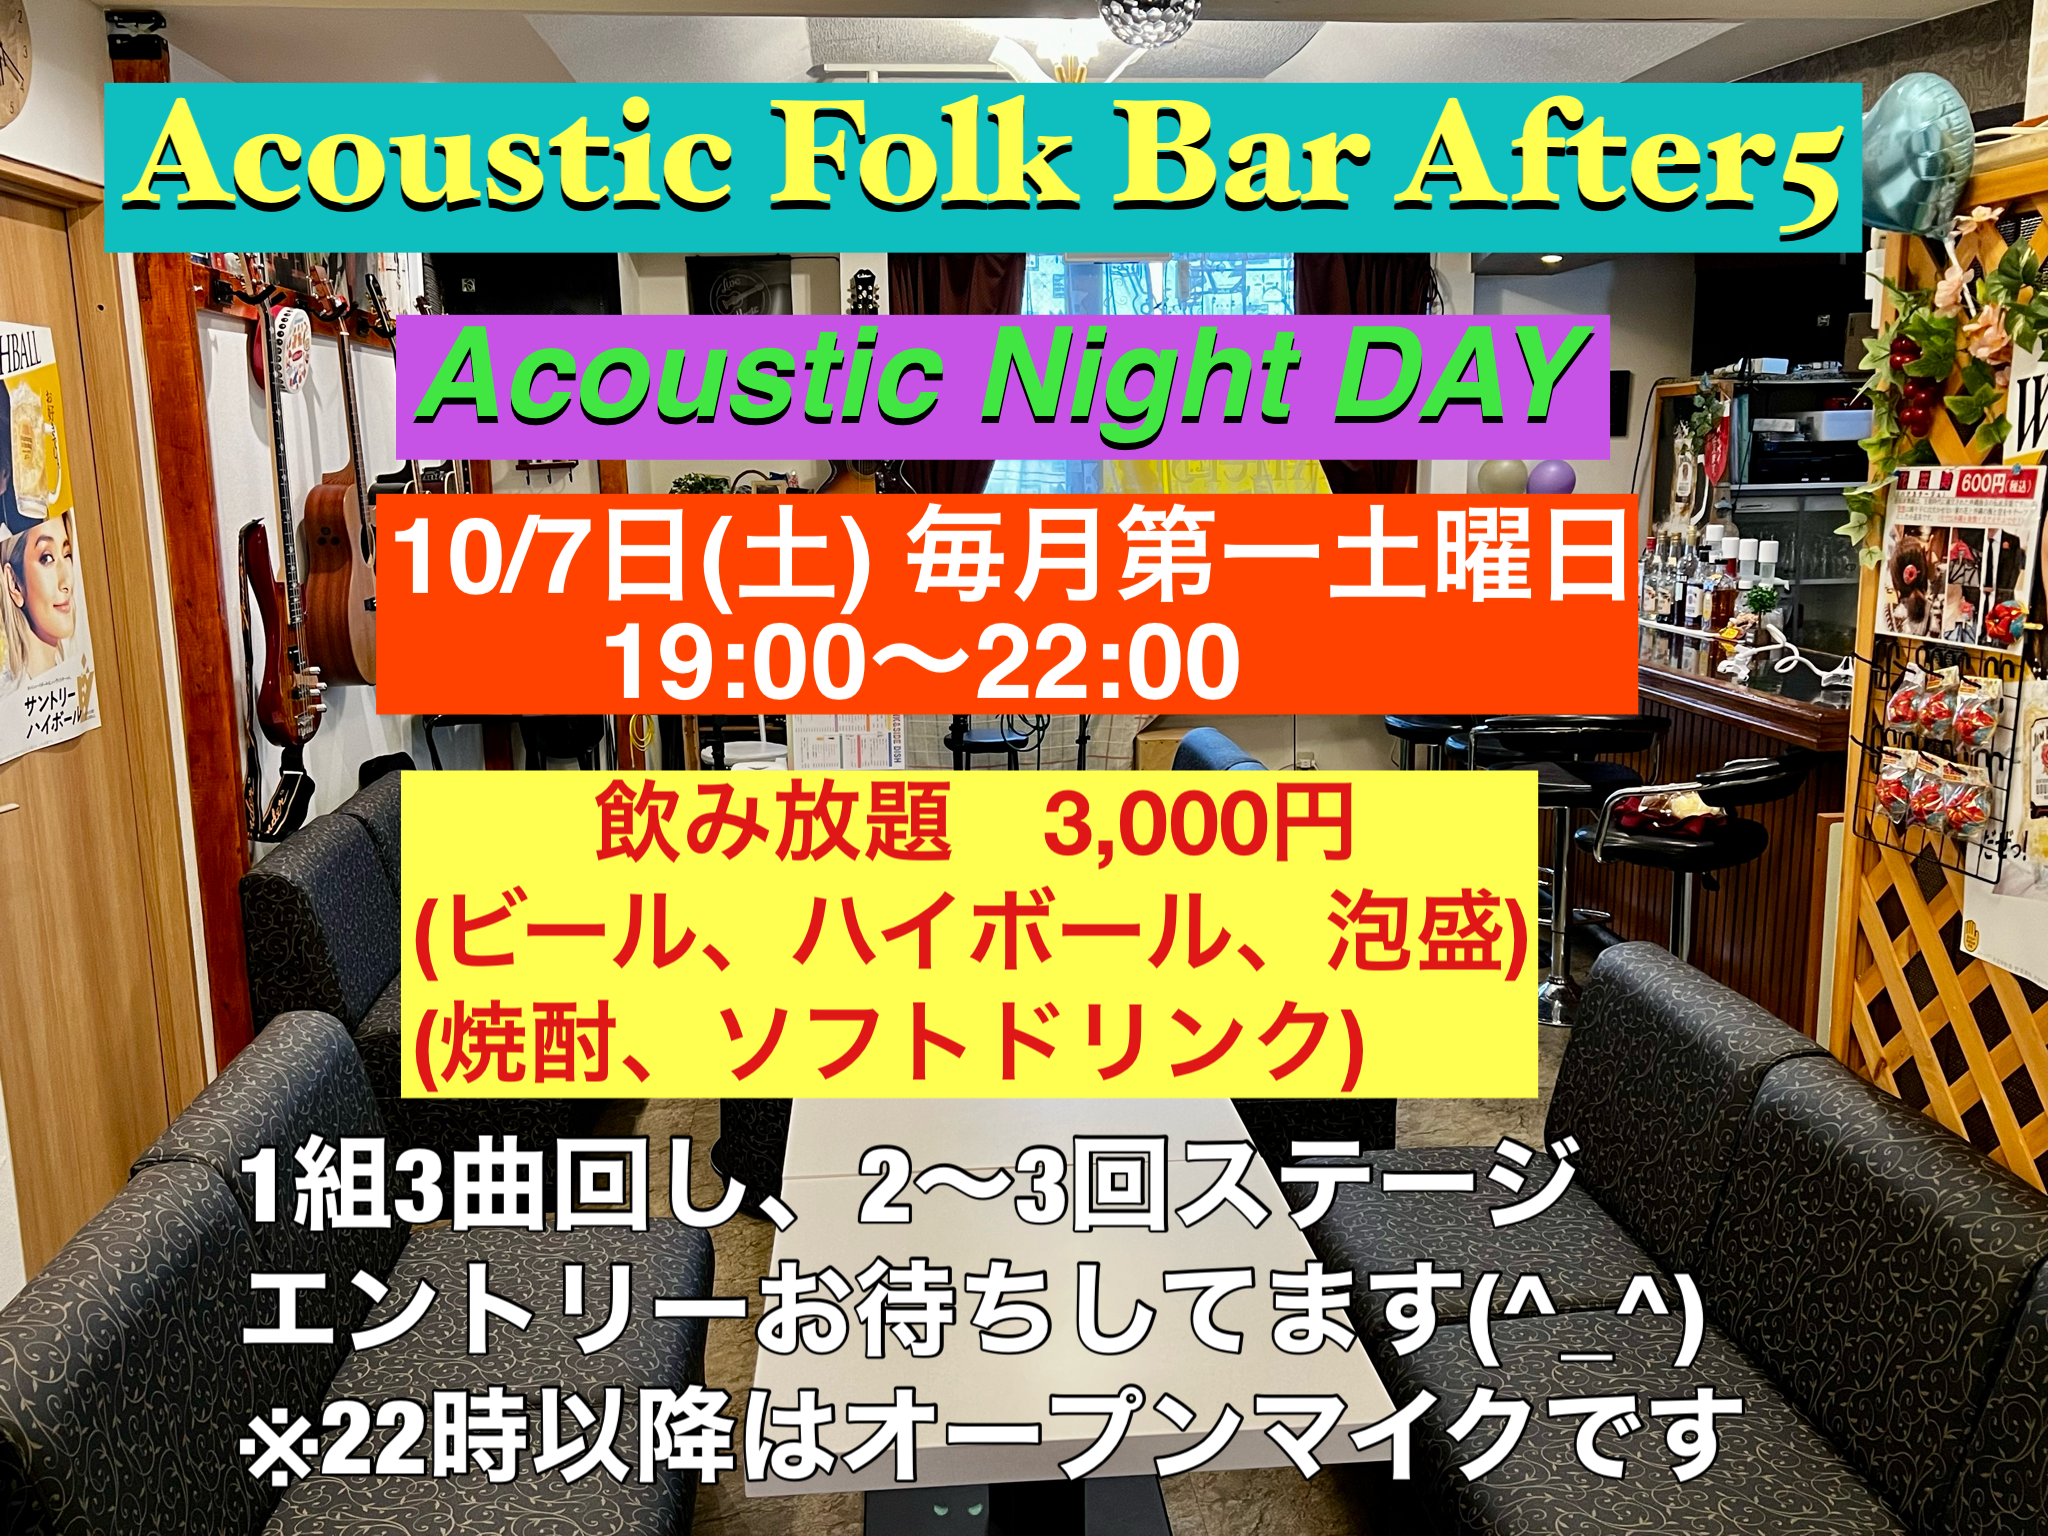 Acoustic Night day